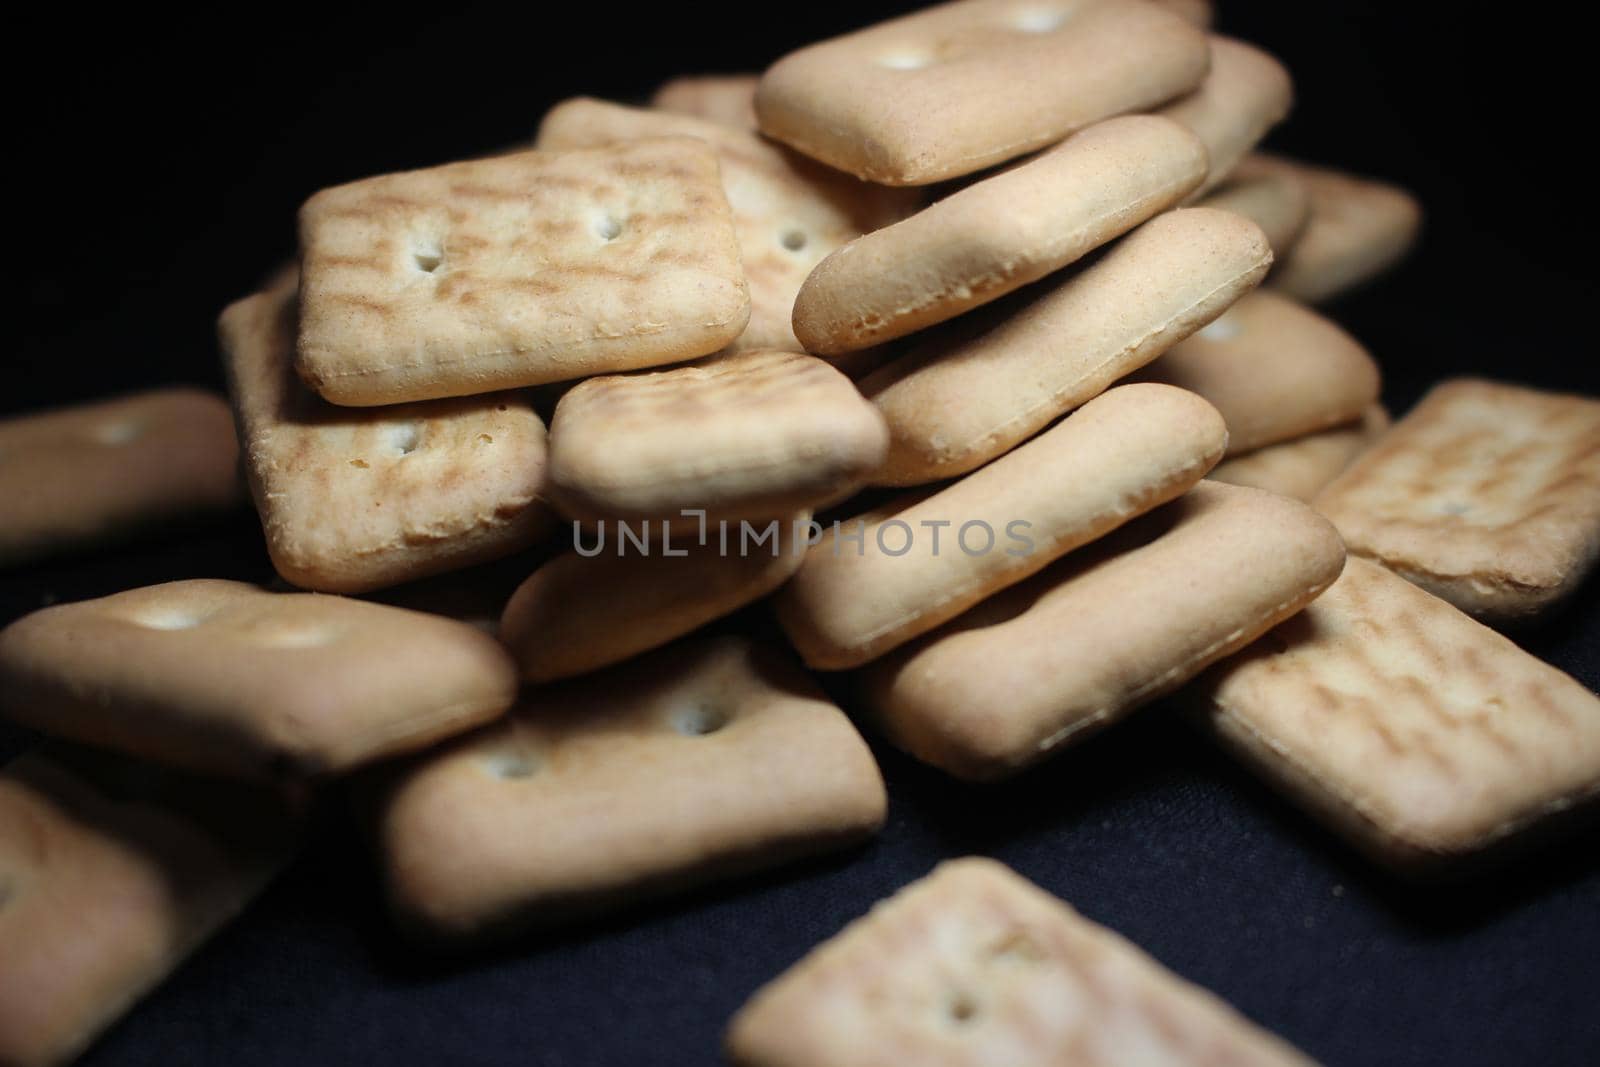 Many rectangular biscuits with small pores on black floor by Photochowk